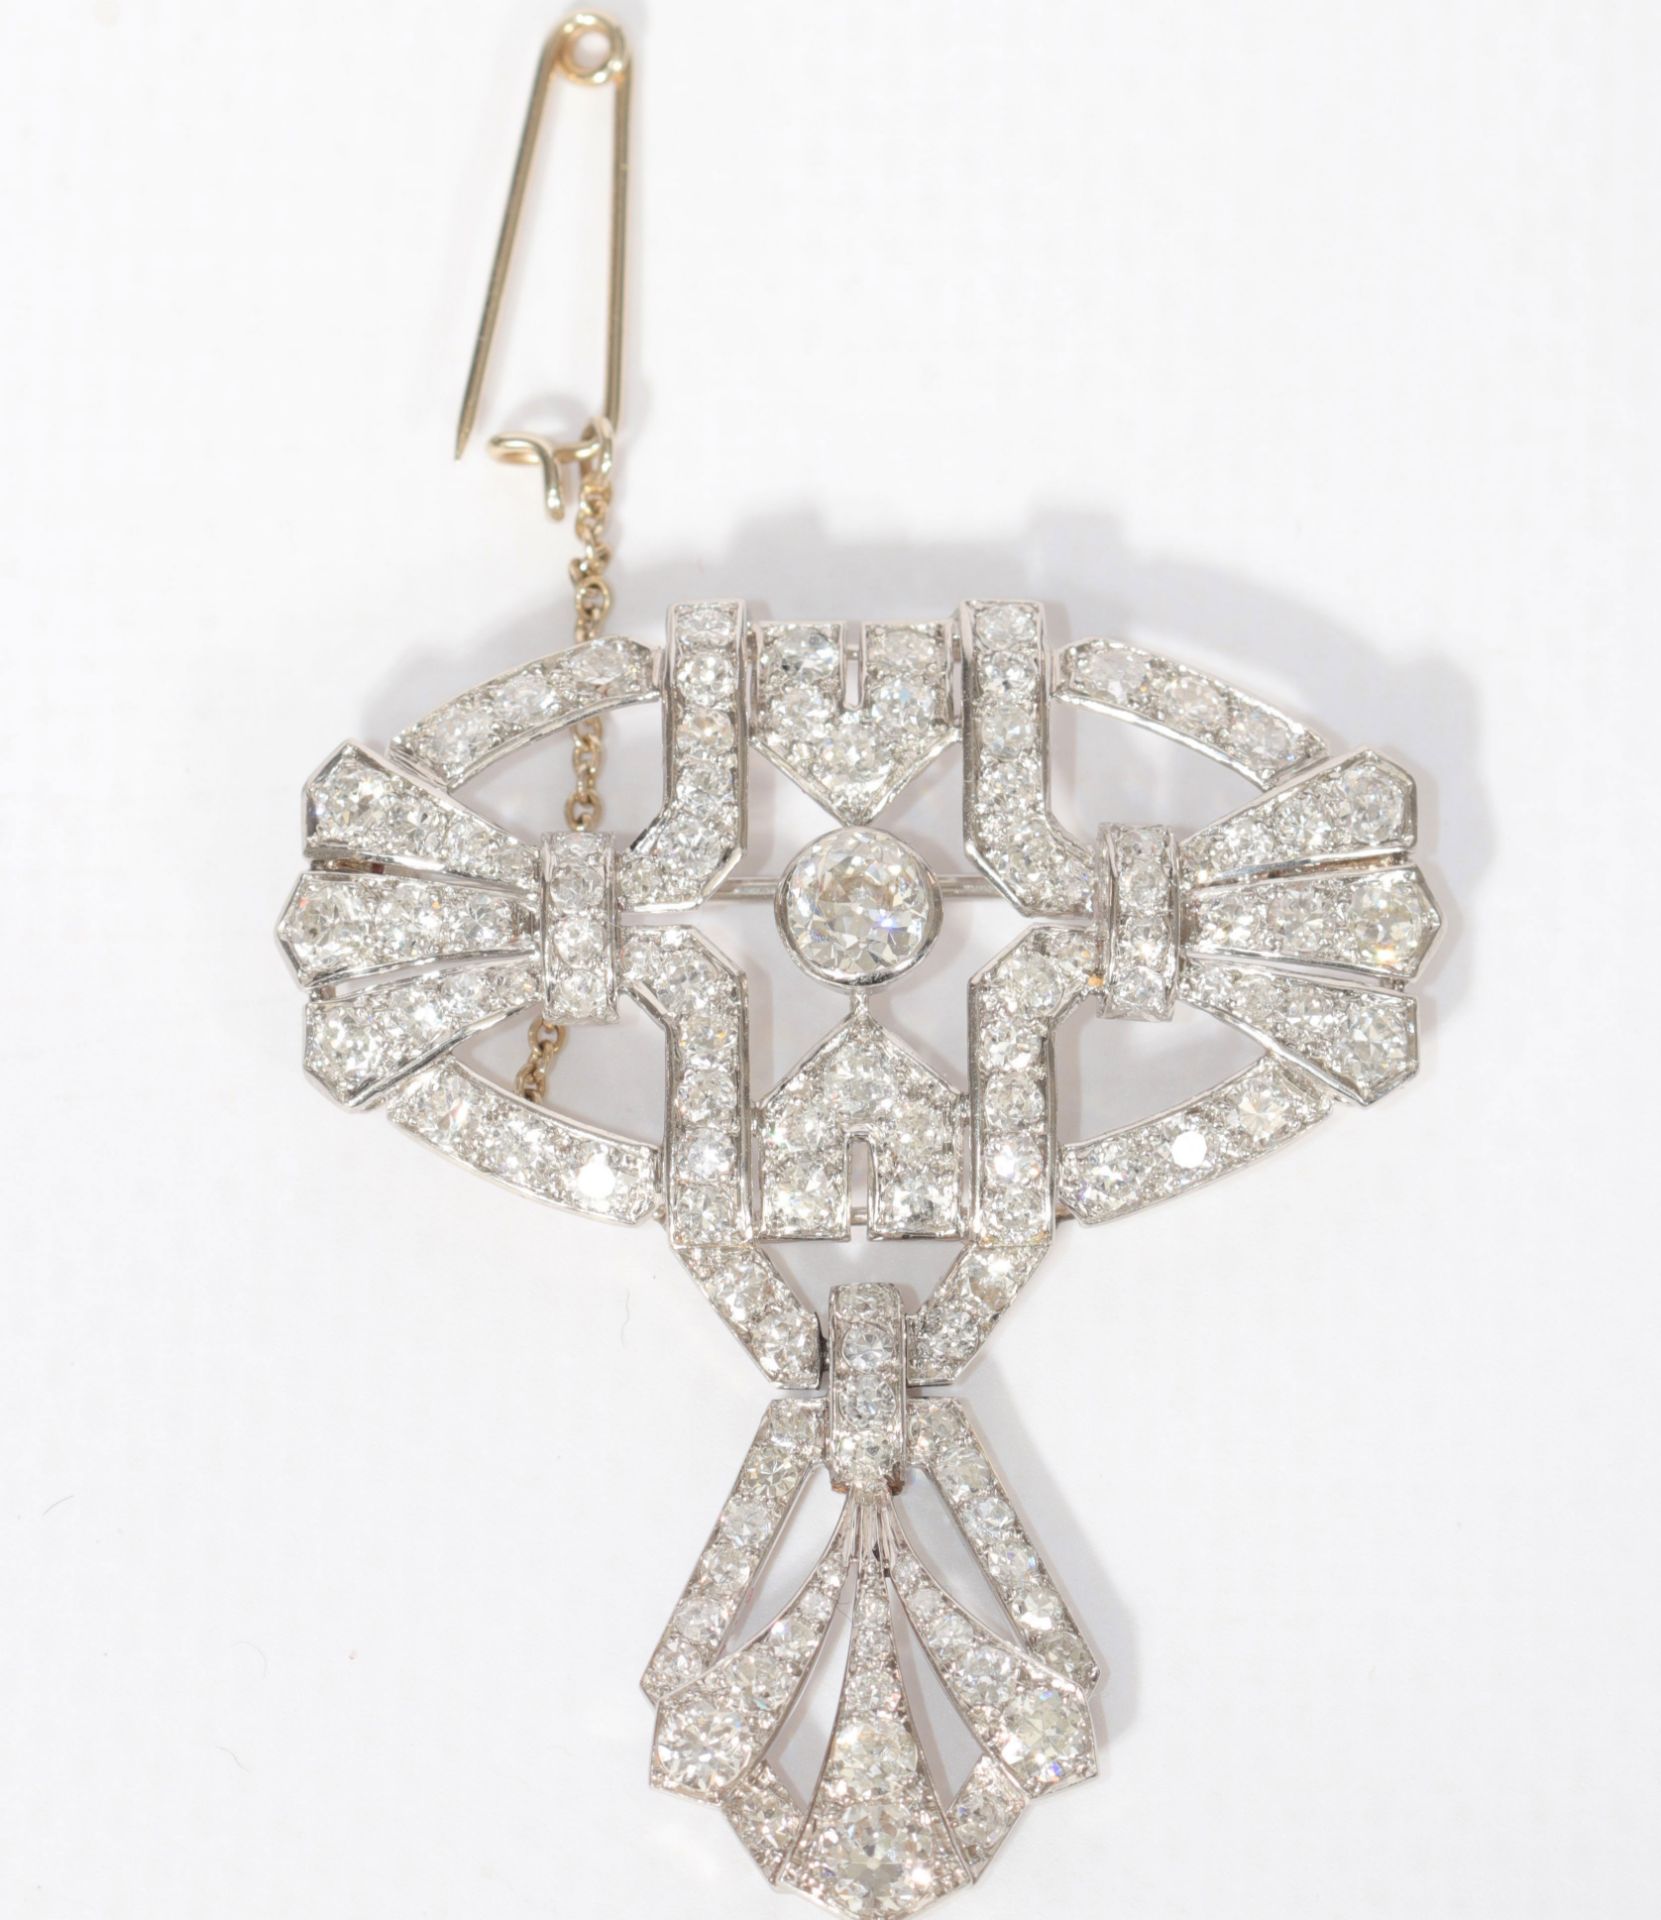 Geometric Art Deco brooch in platinum and paved with diamonds - Image 3 of 3